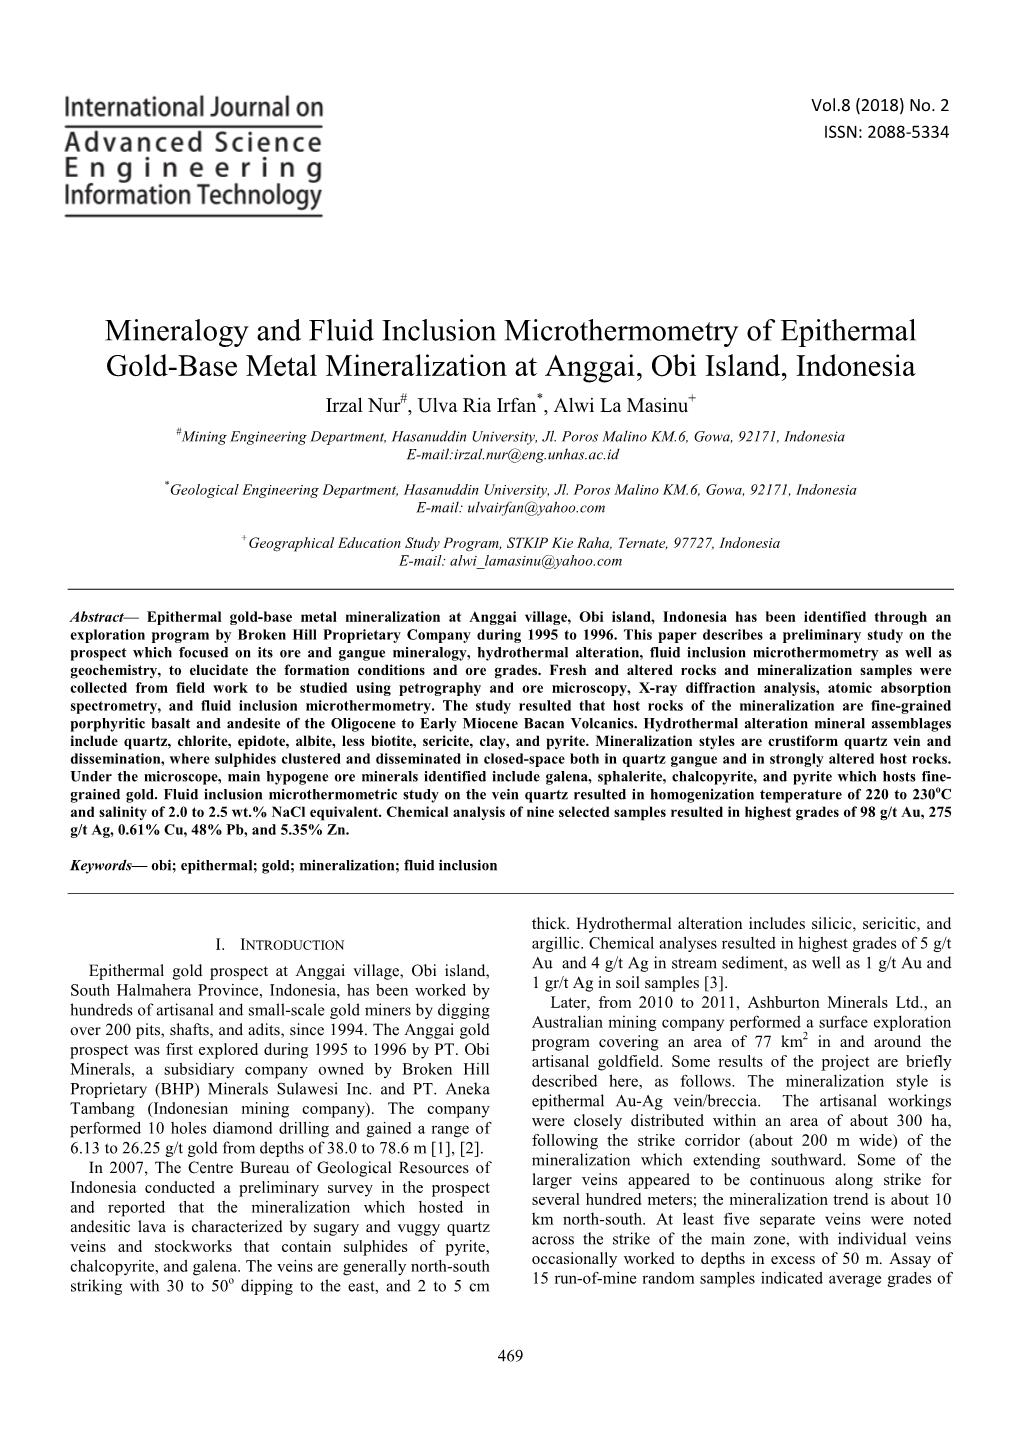 Mineralogy and Fluid Inclusion Microthermometry of Epithermal